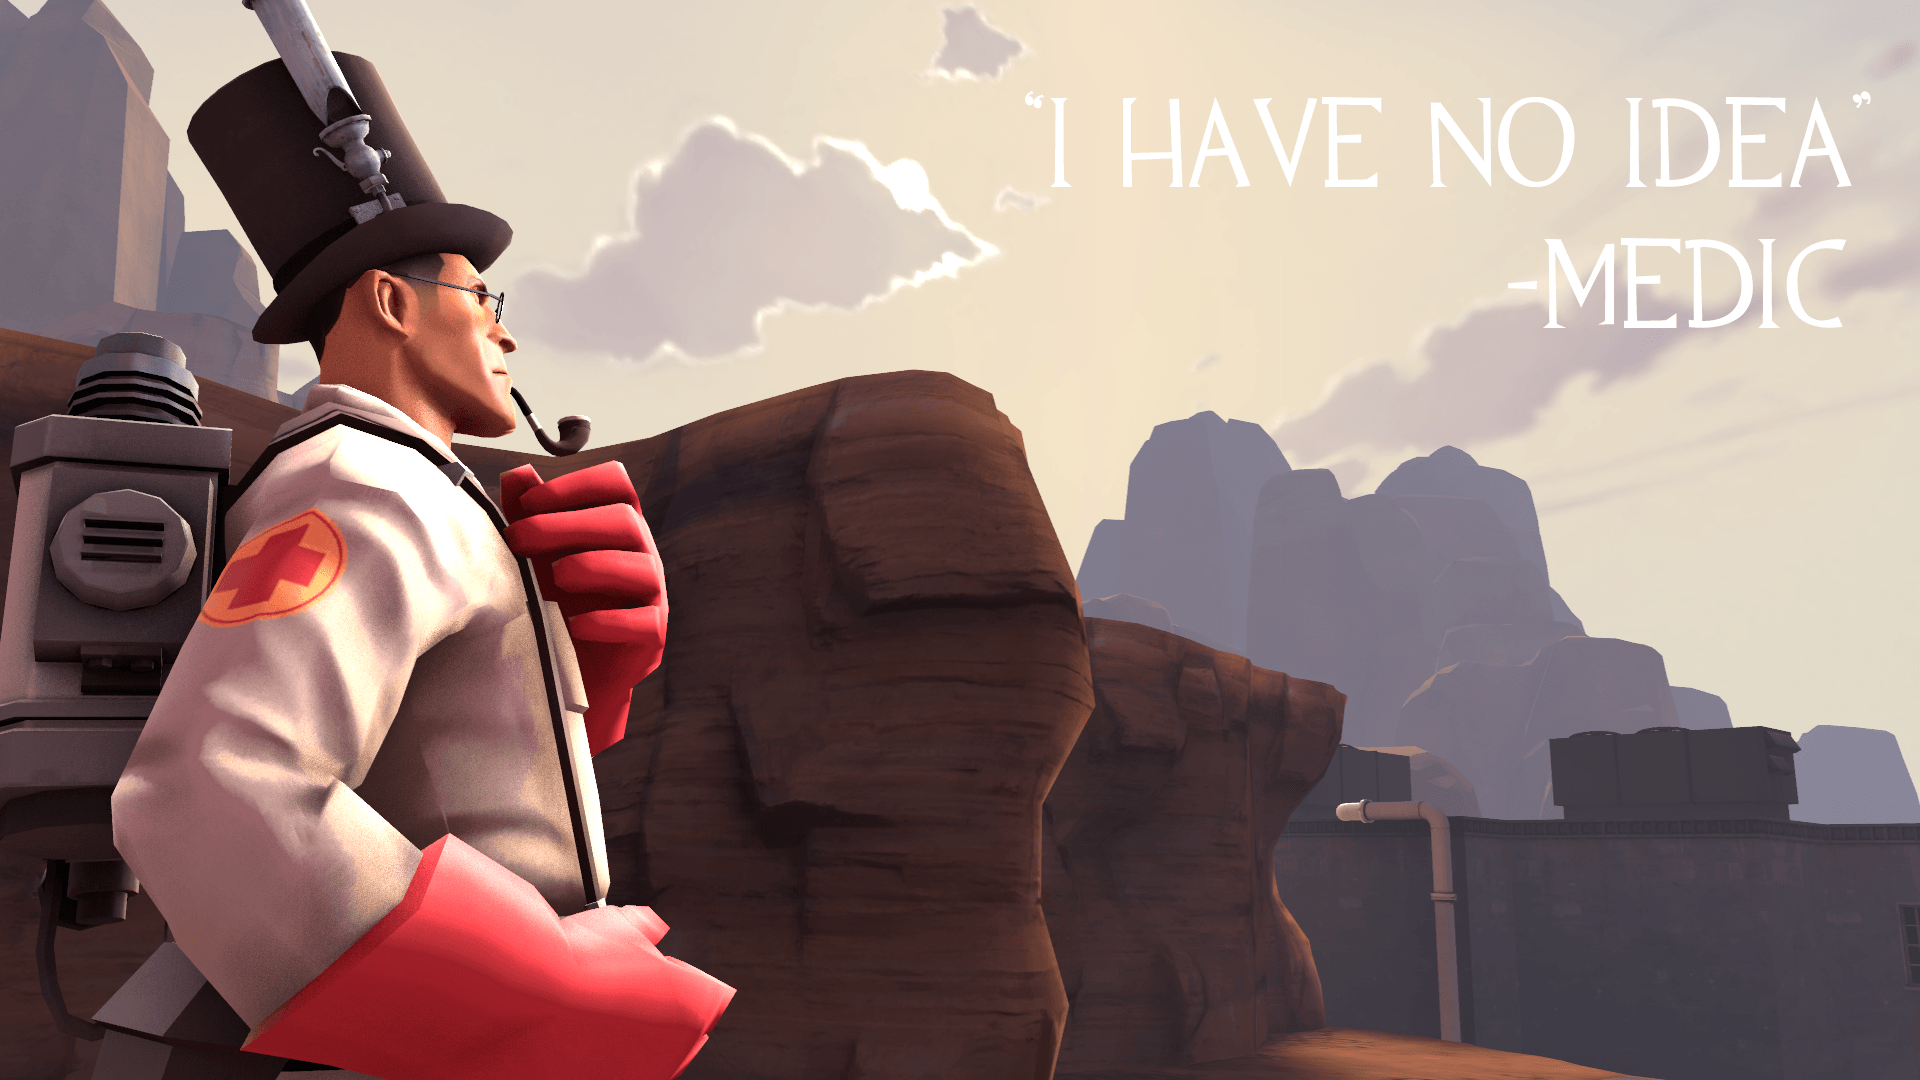 Team Fortress 2(TF2) image TF2 Medic quotes HD wallpaper